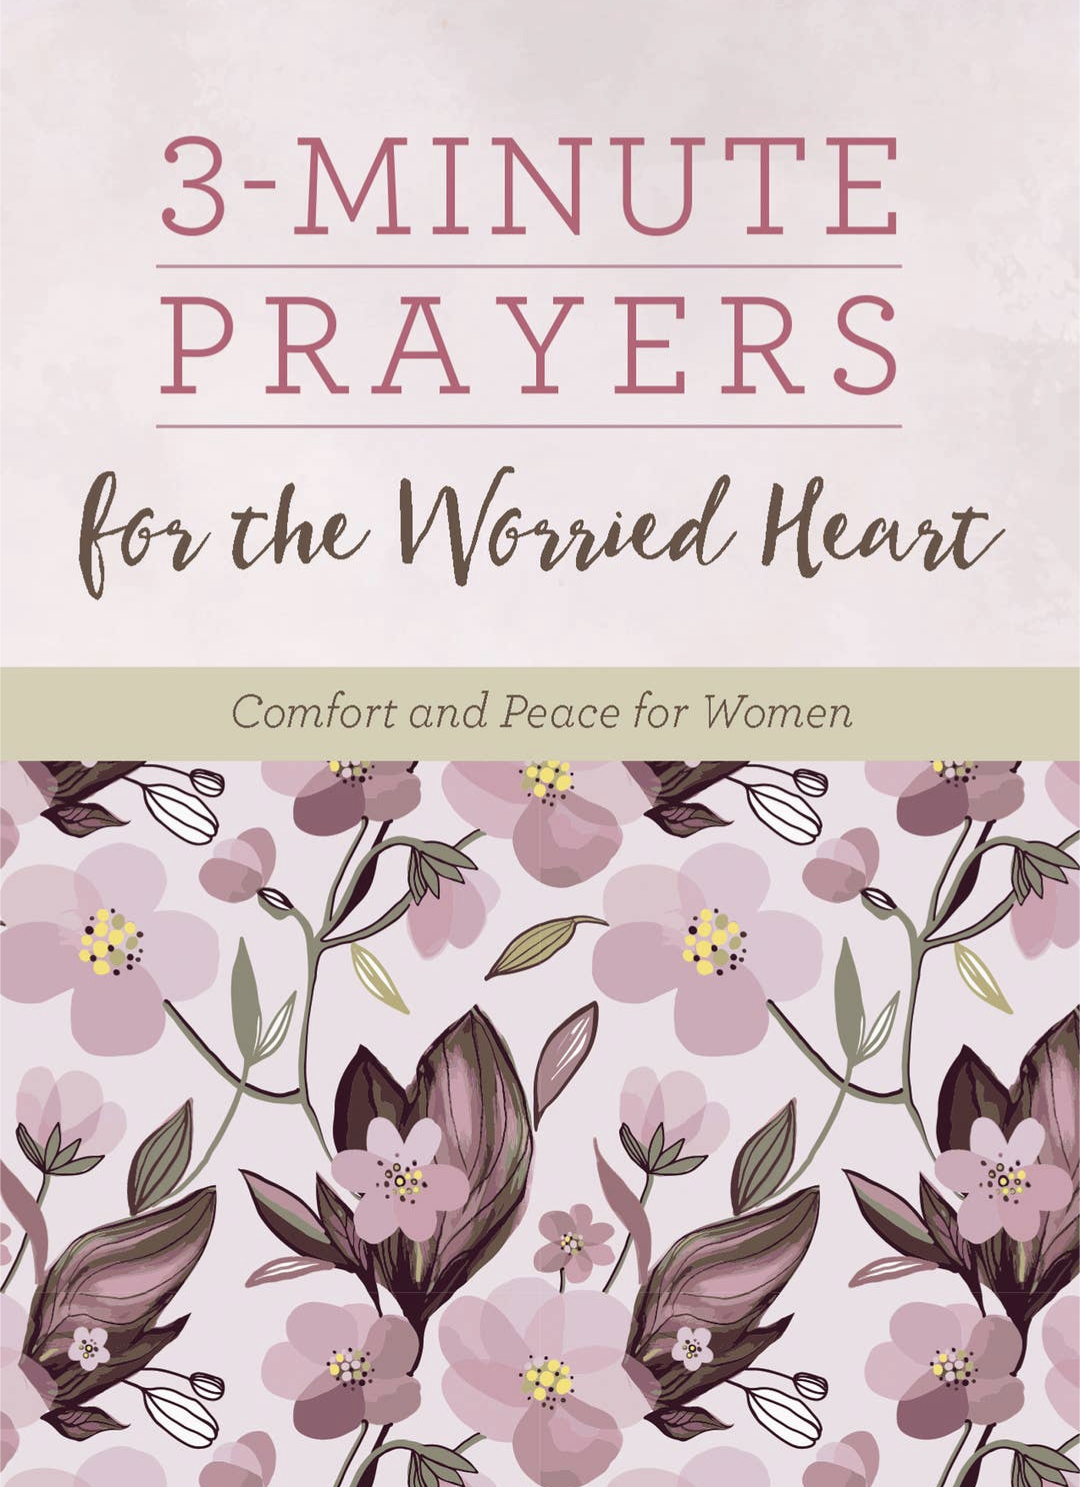 3-Minute Prayers for the Worried Heart